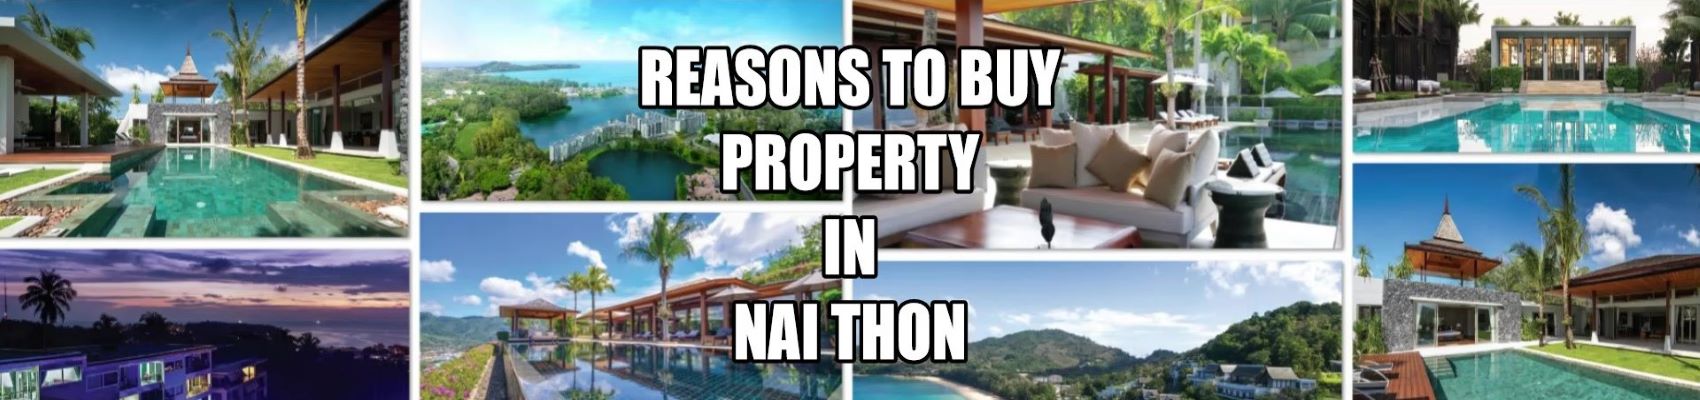 Property in Nai Thon area for sale